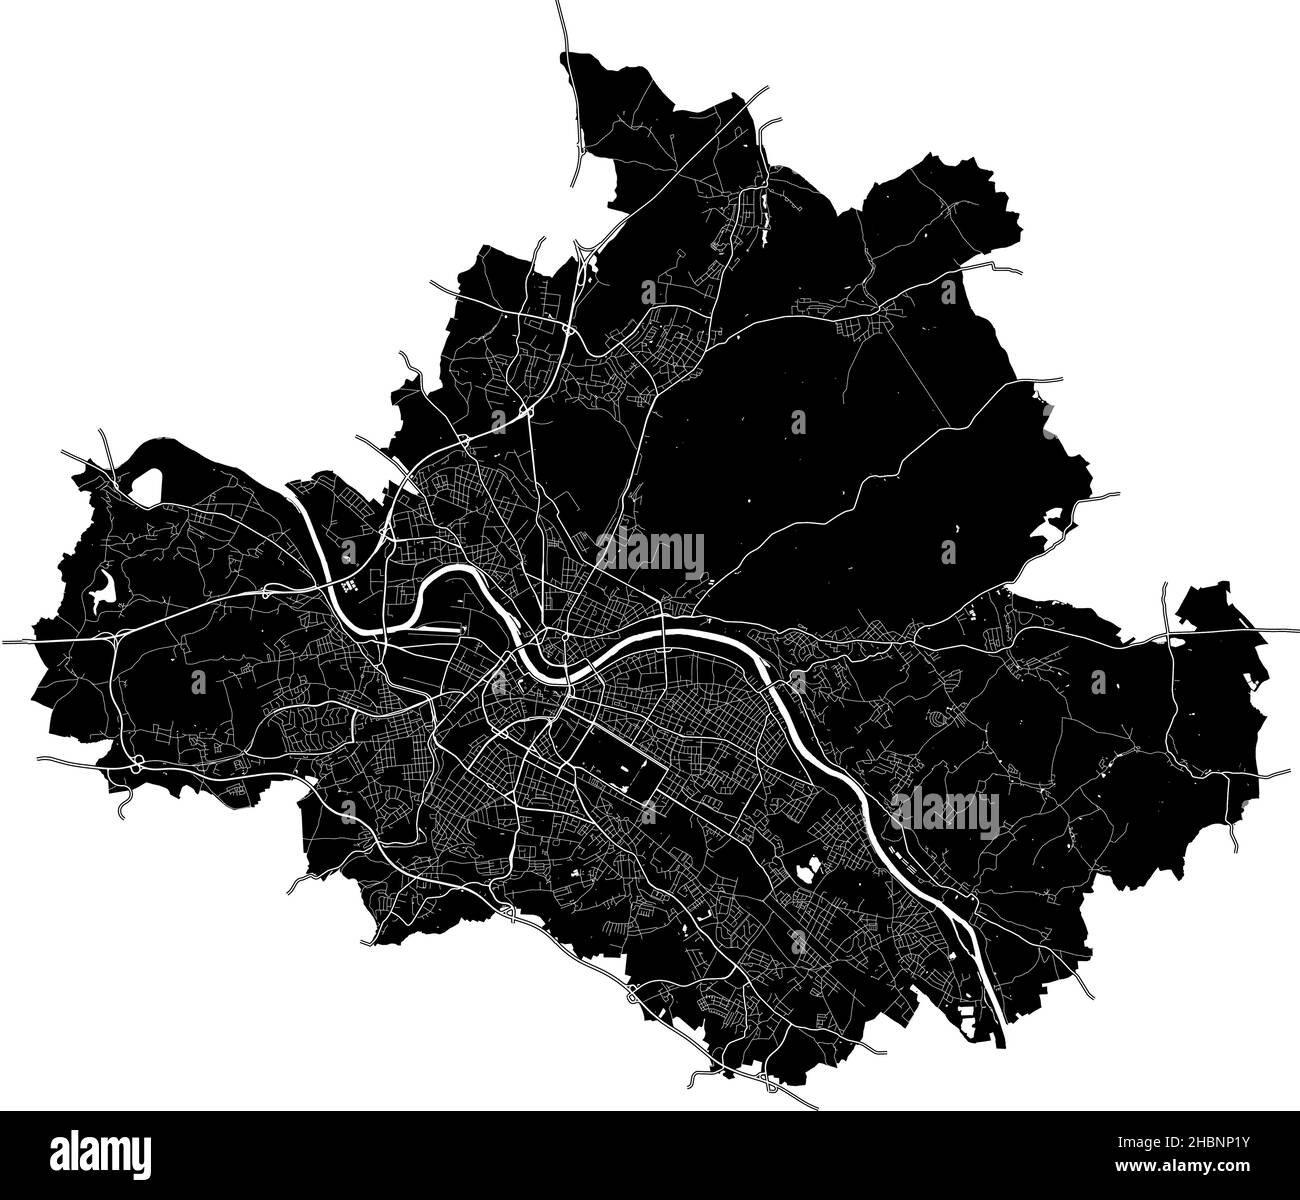 Dresden, Saxony, Germany, Germany, high resolution vector map with city boundaries, and editable paths. The city map was drawn with white areas and li Stock Vector